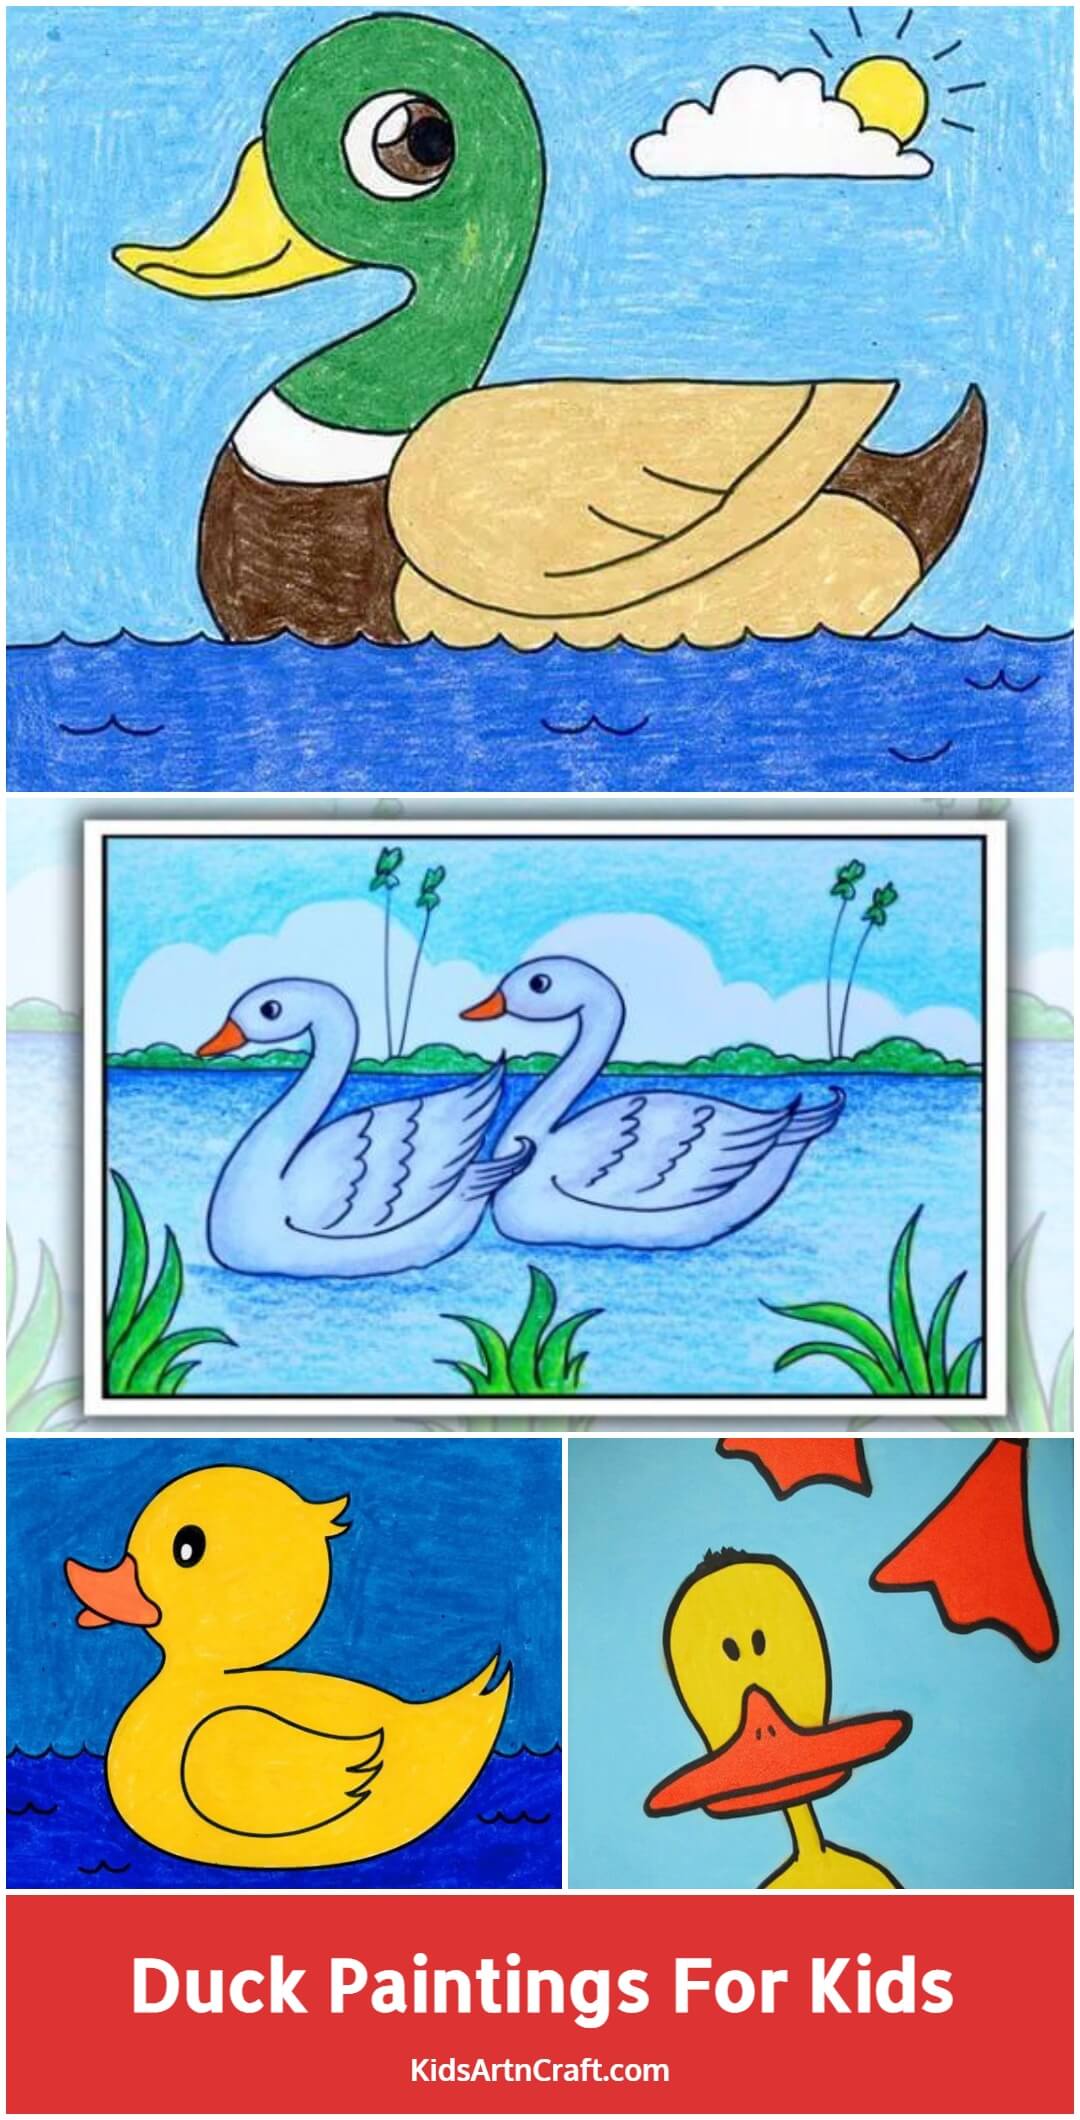 Duck Paintings for Kids